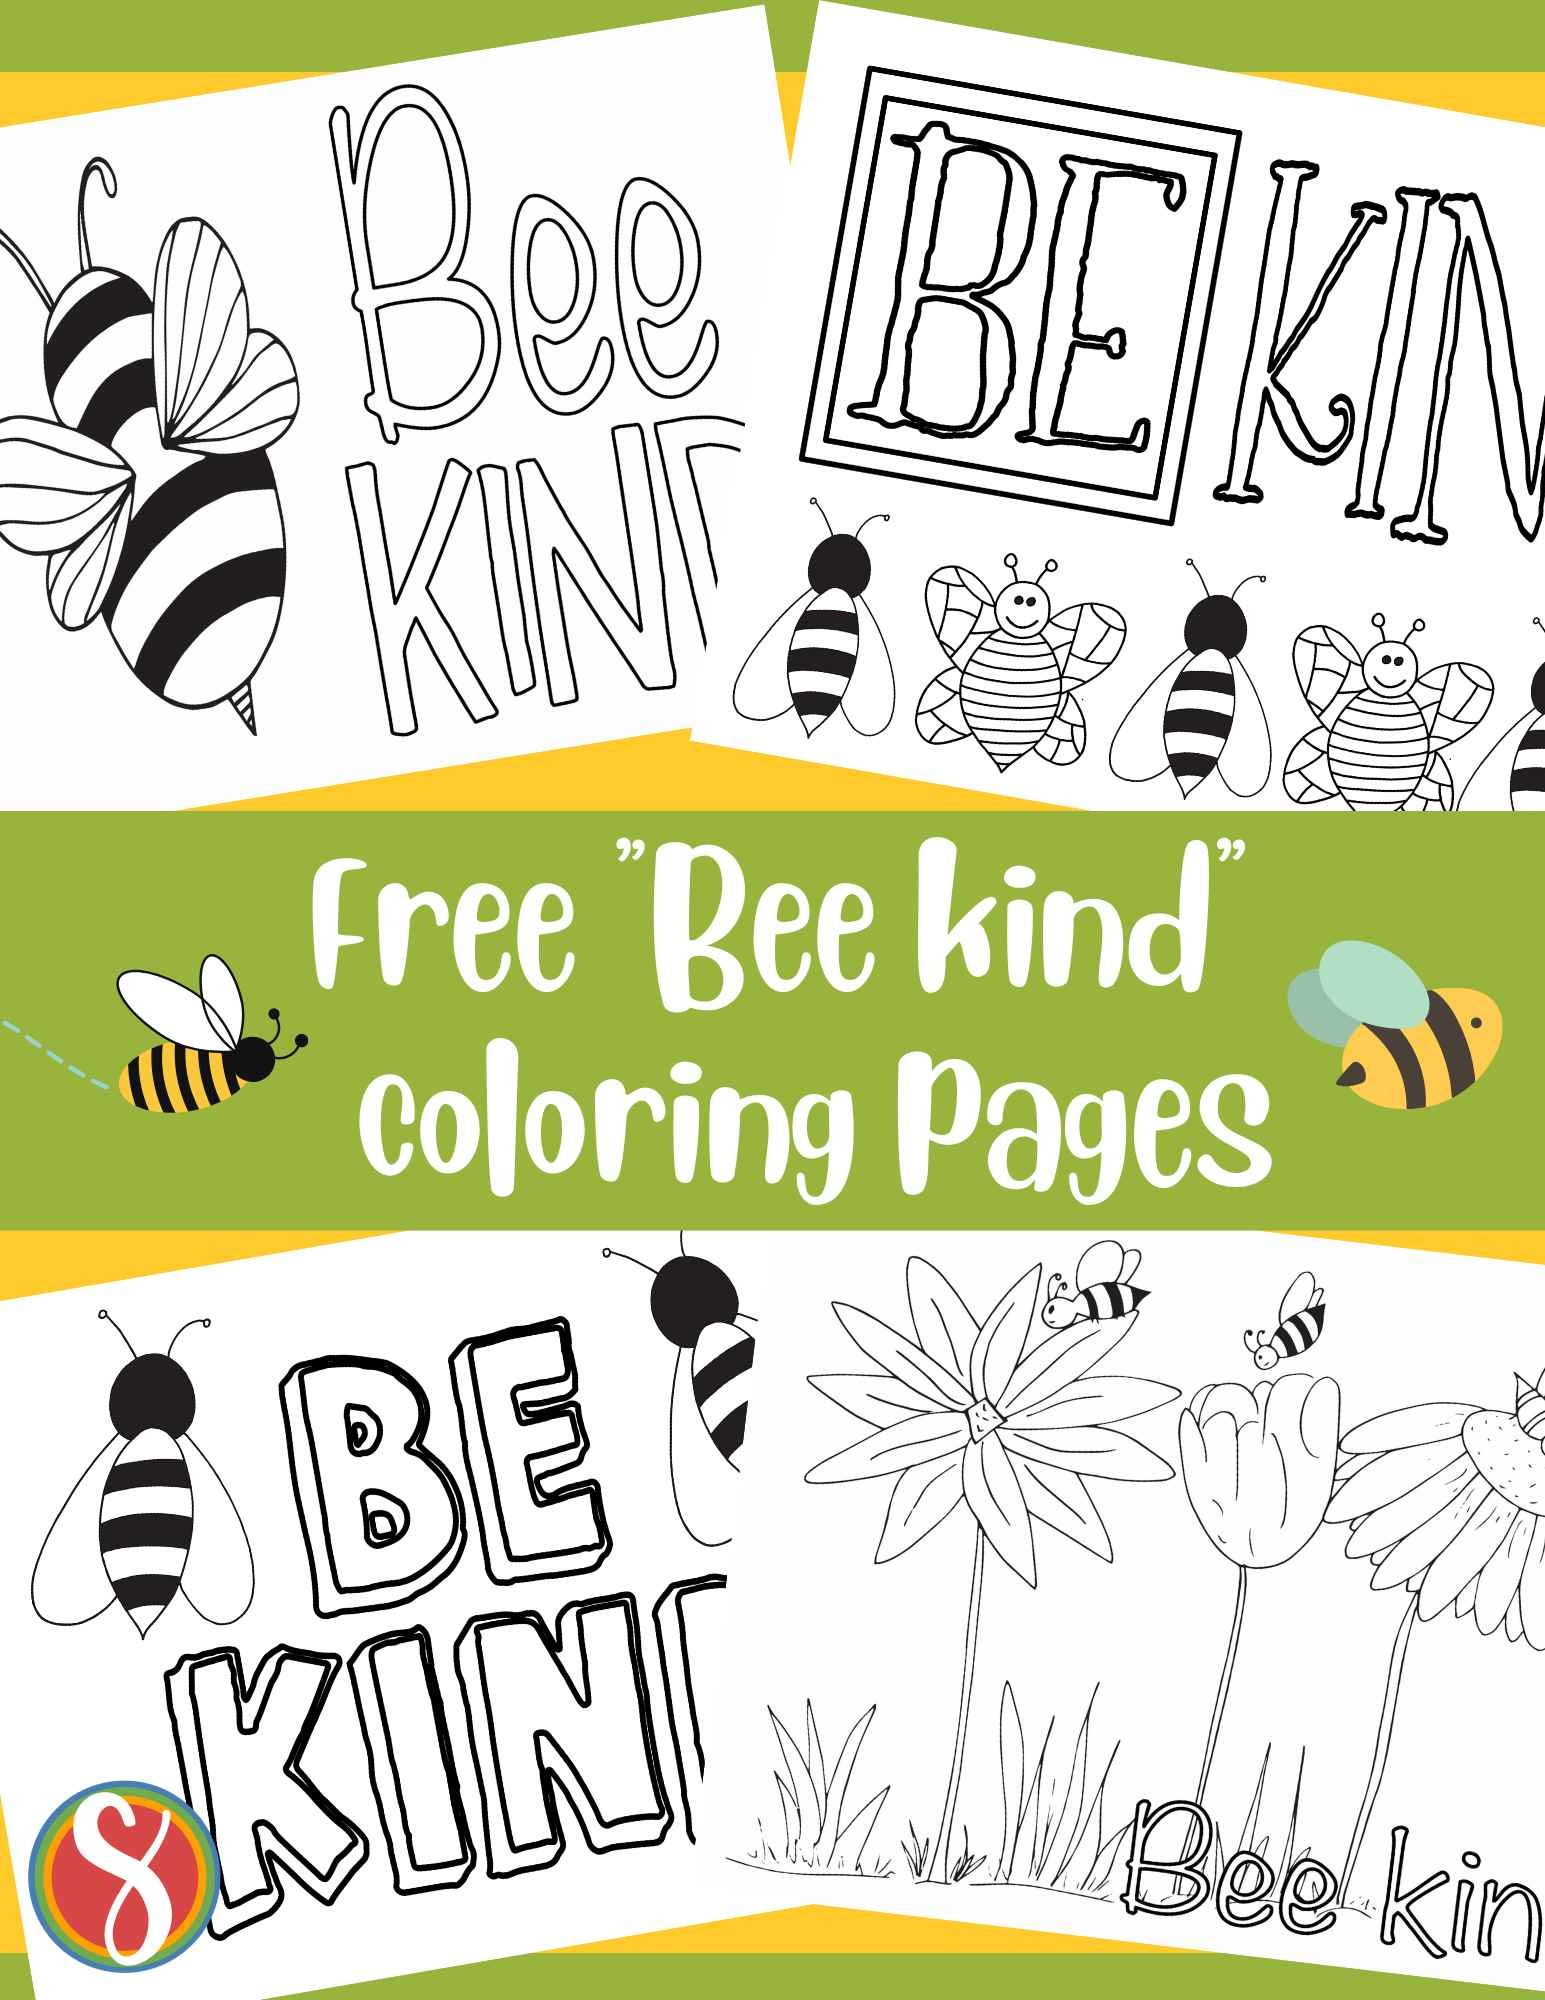 a collage of bee coloring pages - lots of drawings of bees on a yellow background, with a round blue badge with the words "free bee coloring pages" inside